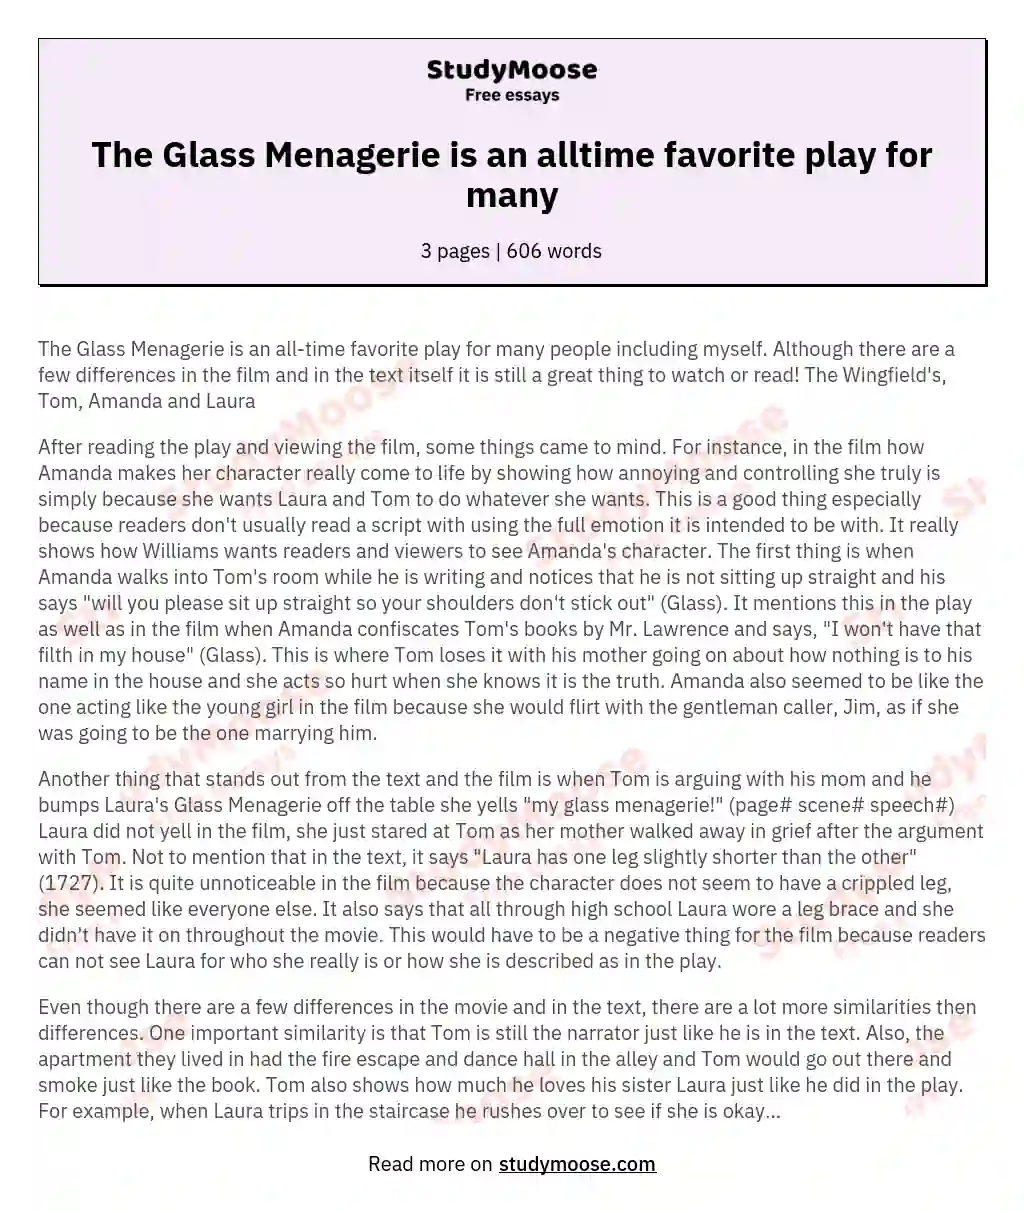 The Glass Menagerie is an alltime favorite play for many essay